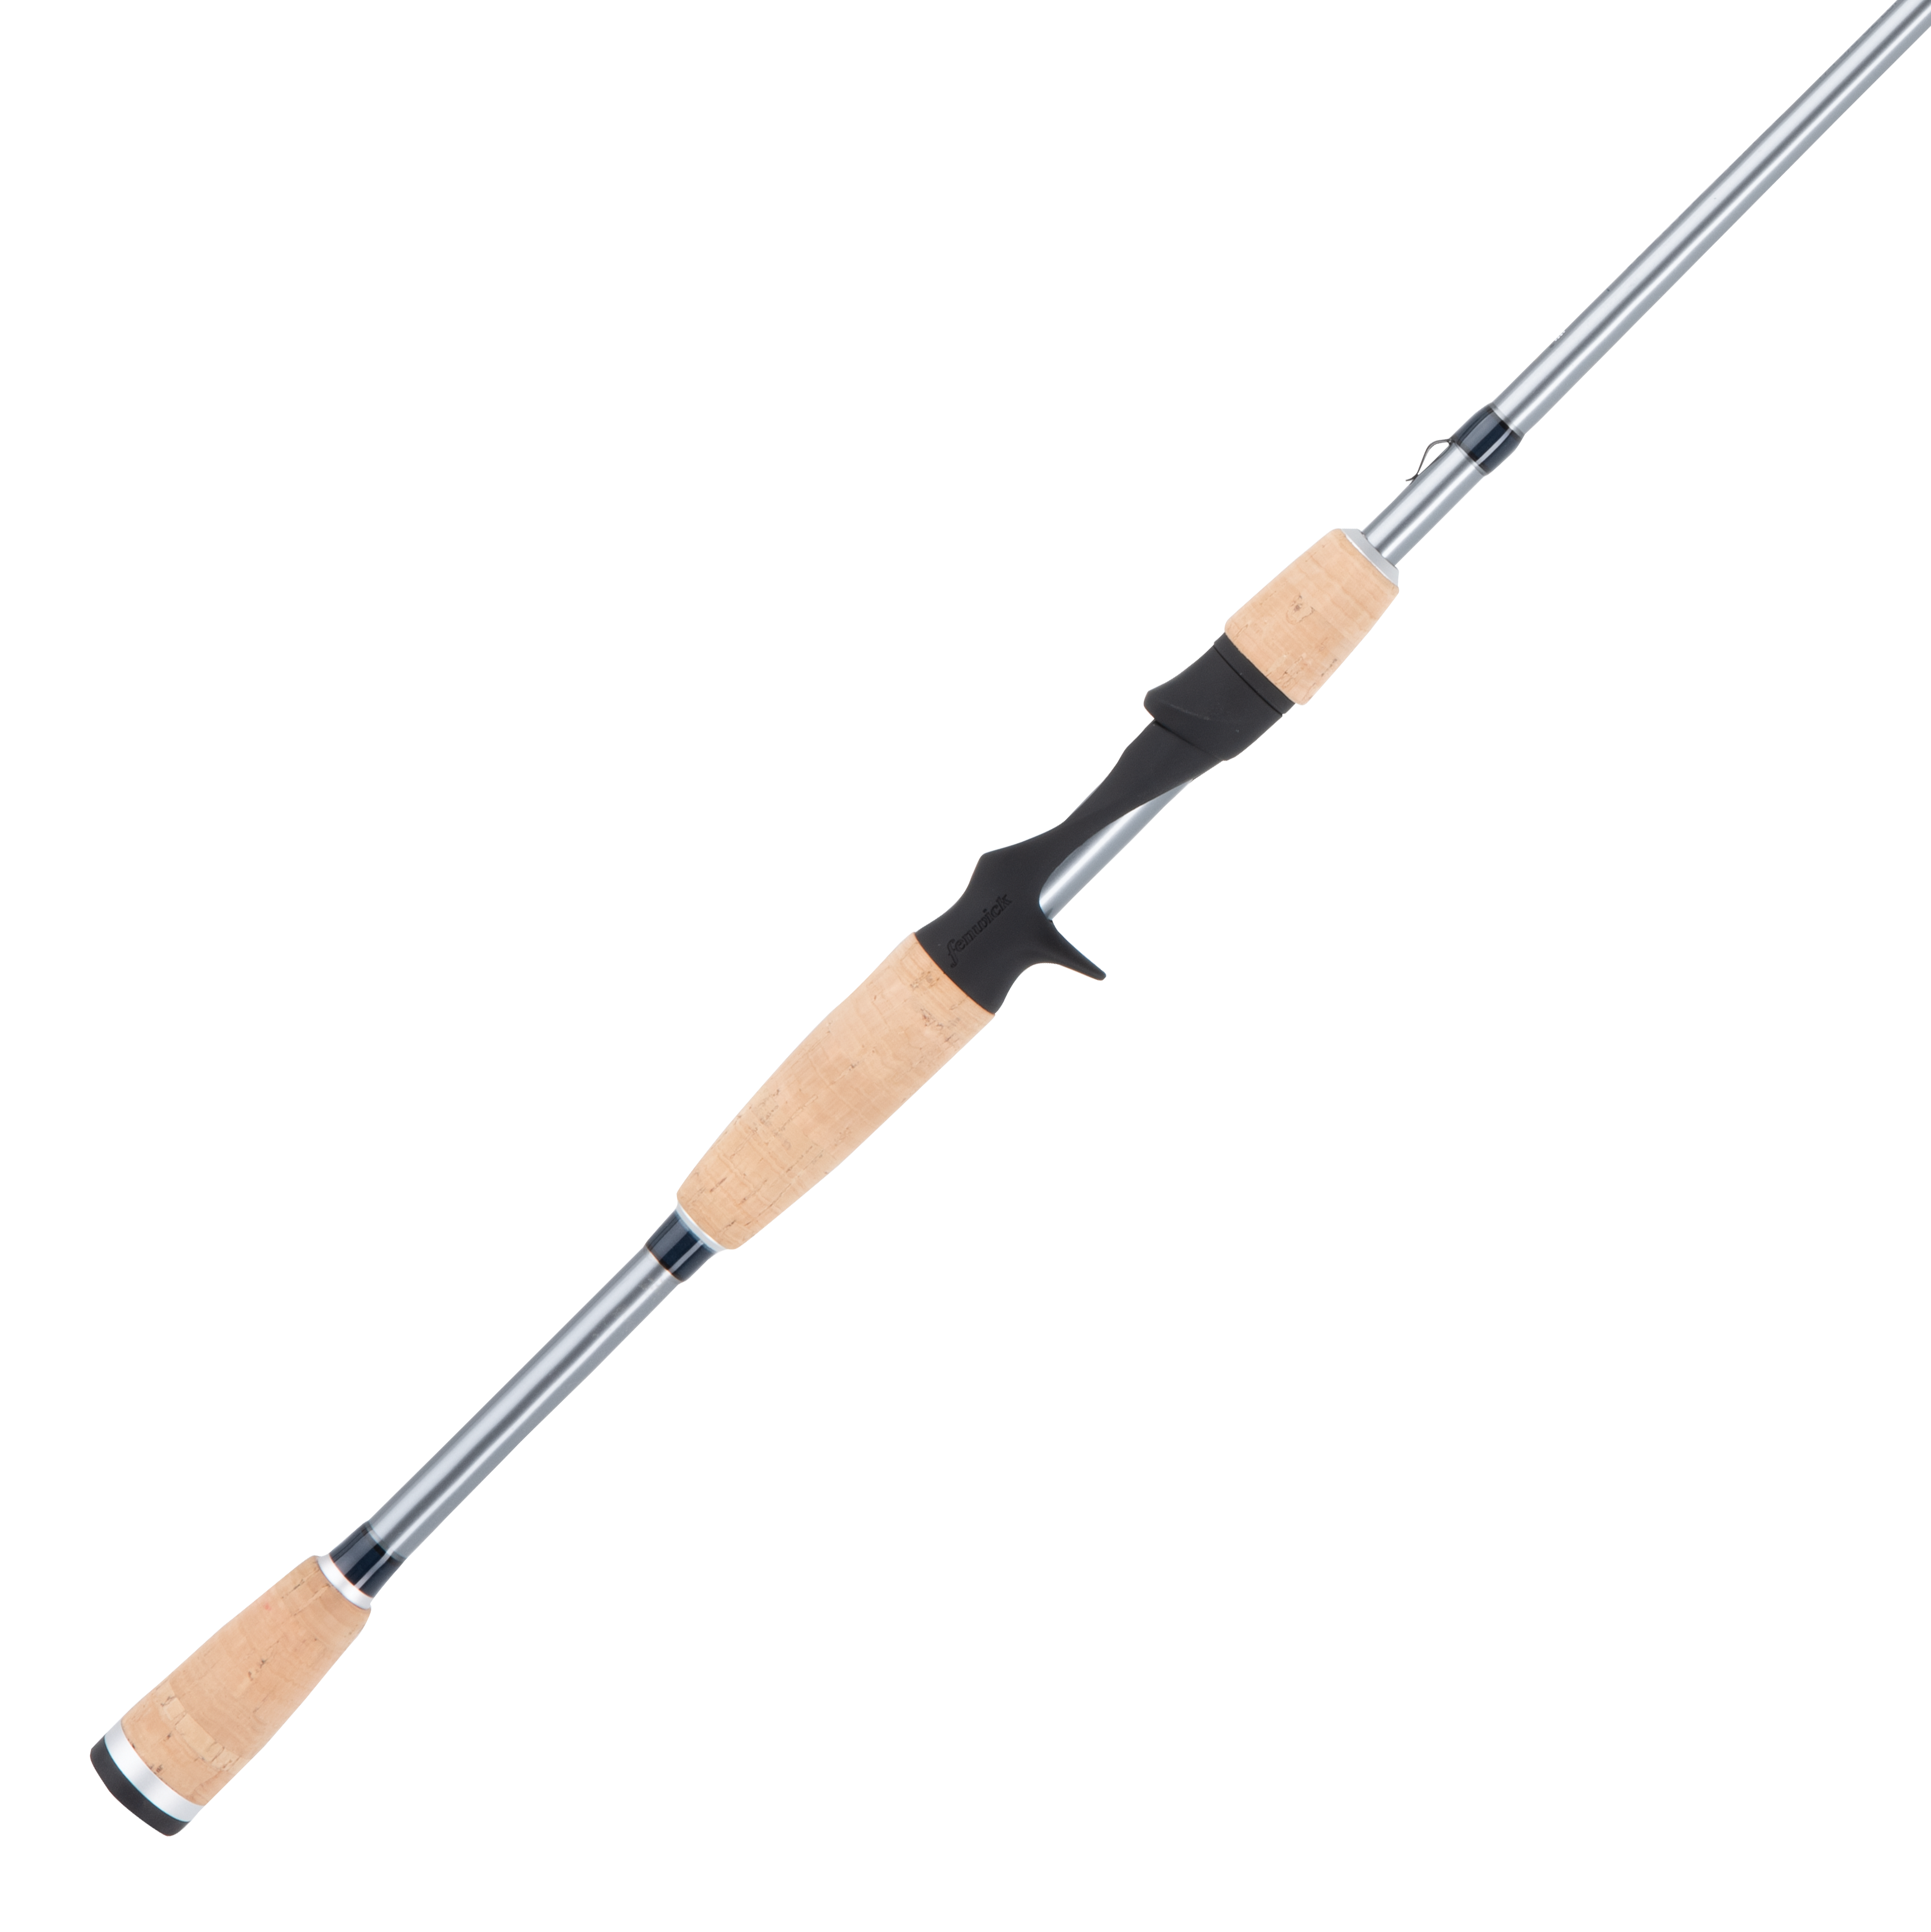 https://cs1.0ps.us/original/opplanet-fenwick-world-class-casting-rod-handle-type-b-7ft-2in-rod-length-heavy-power-fast-action-1-piece-wcl72h-fc-main